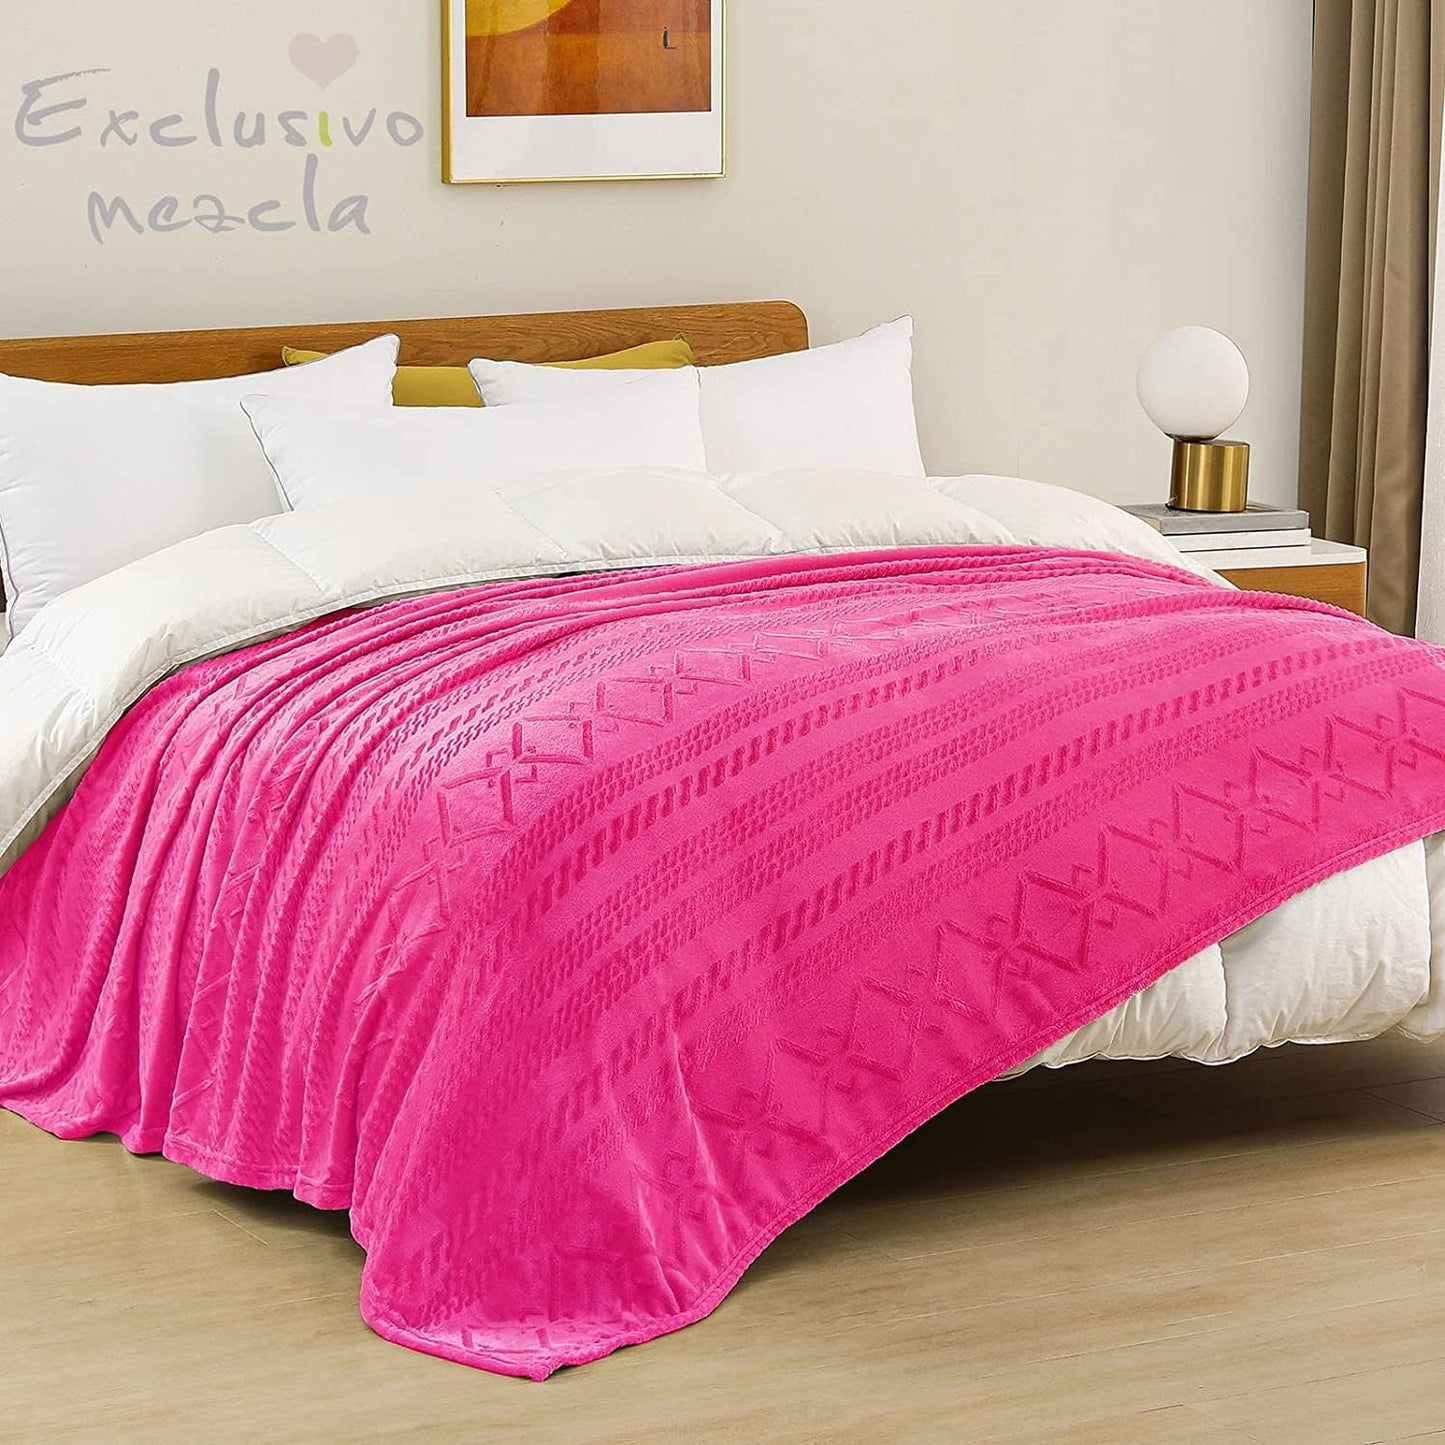 Exclusivo Mezcla Queen Size Soft Bed Blanket, Warm Fuzzy Luxury Bed Blankets, Decorative Geometry Pattern Plush Throw Blanket for Bed, 90x90 Inches, Hot Pink